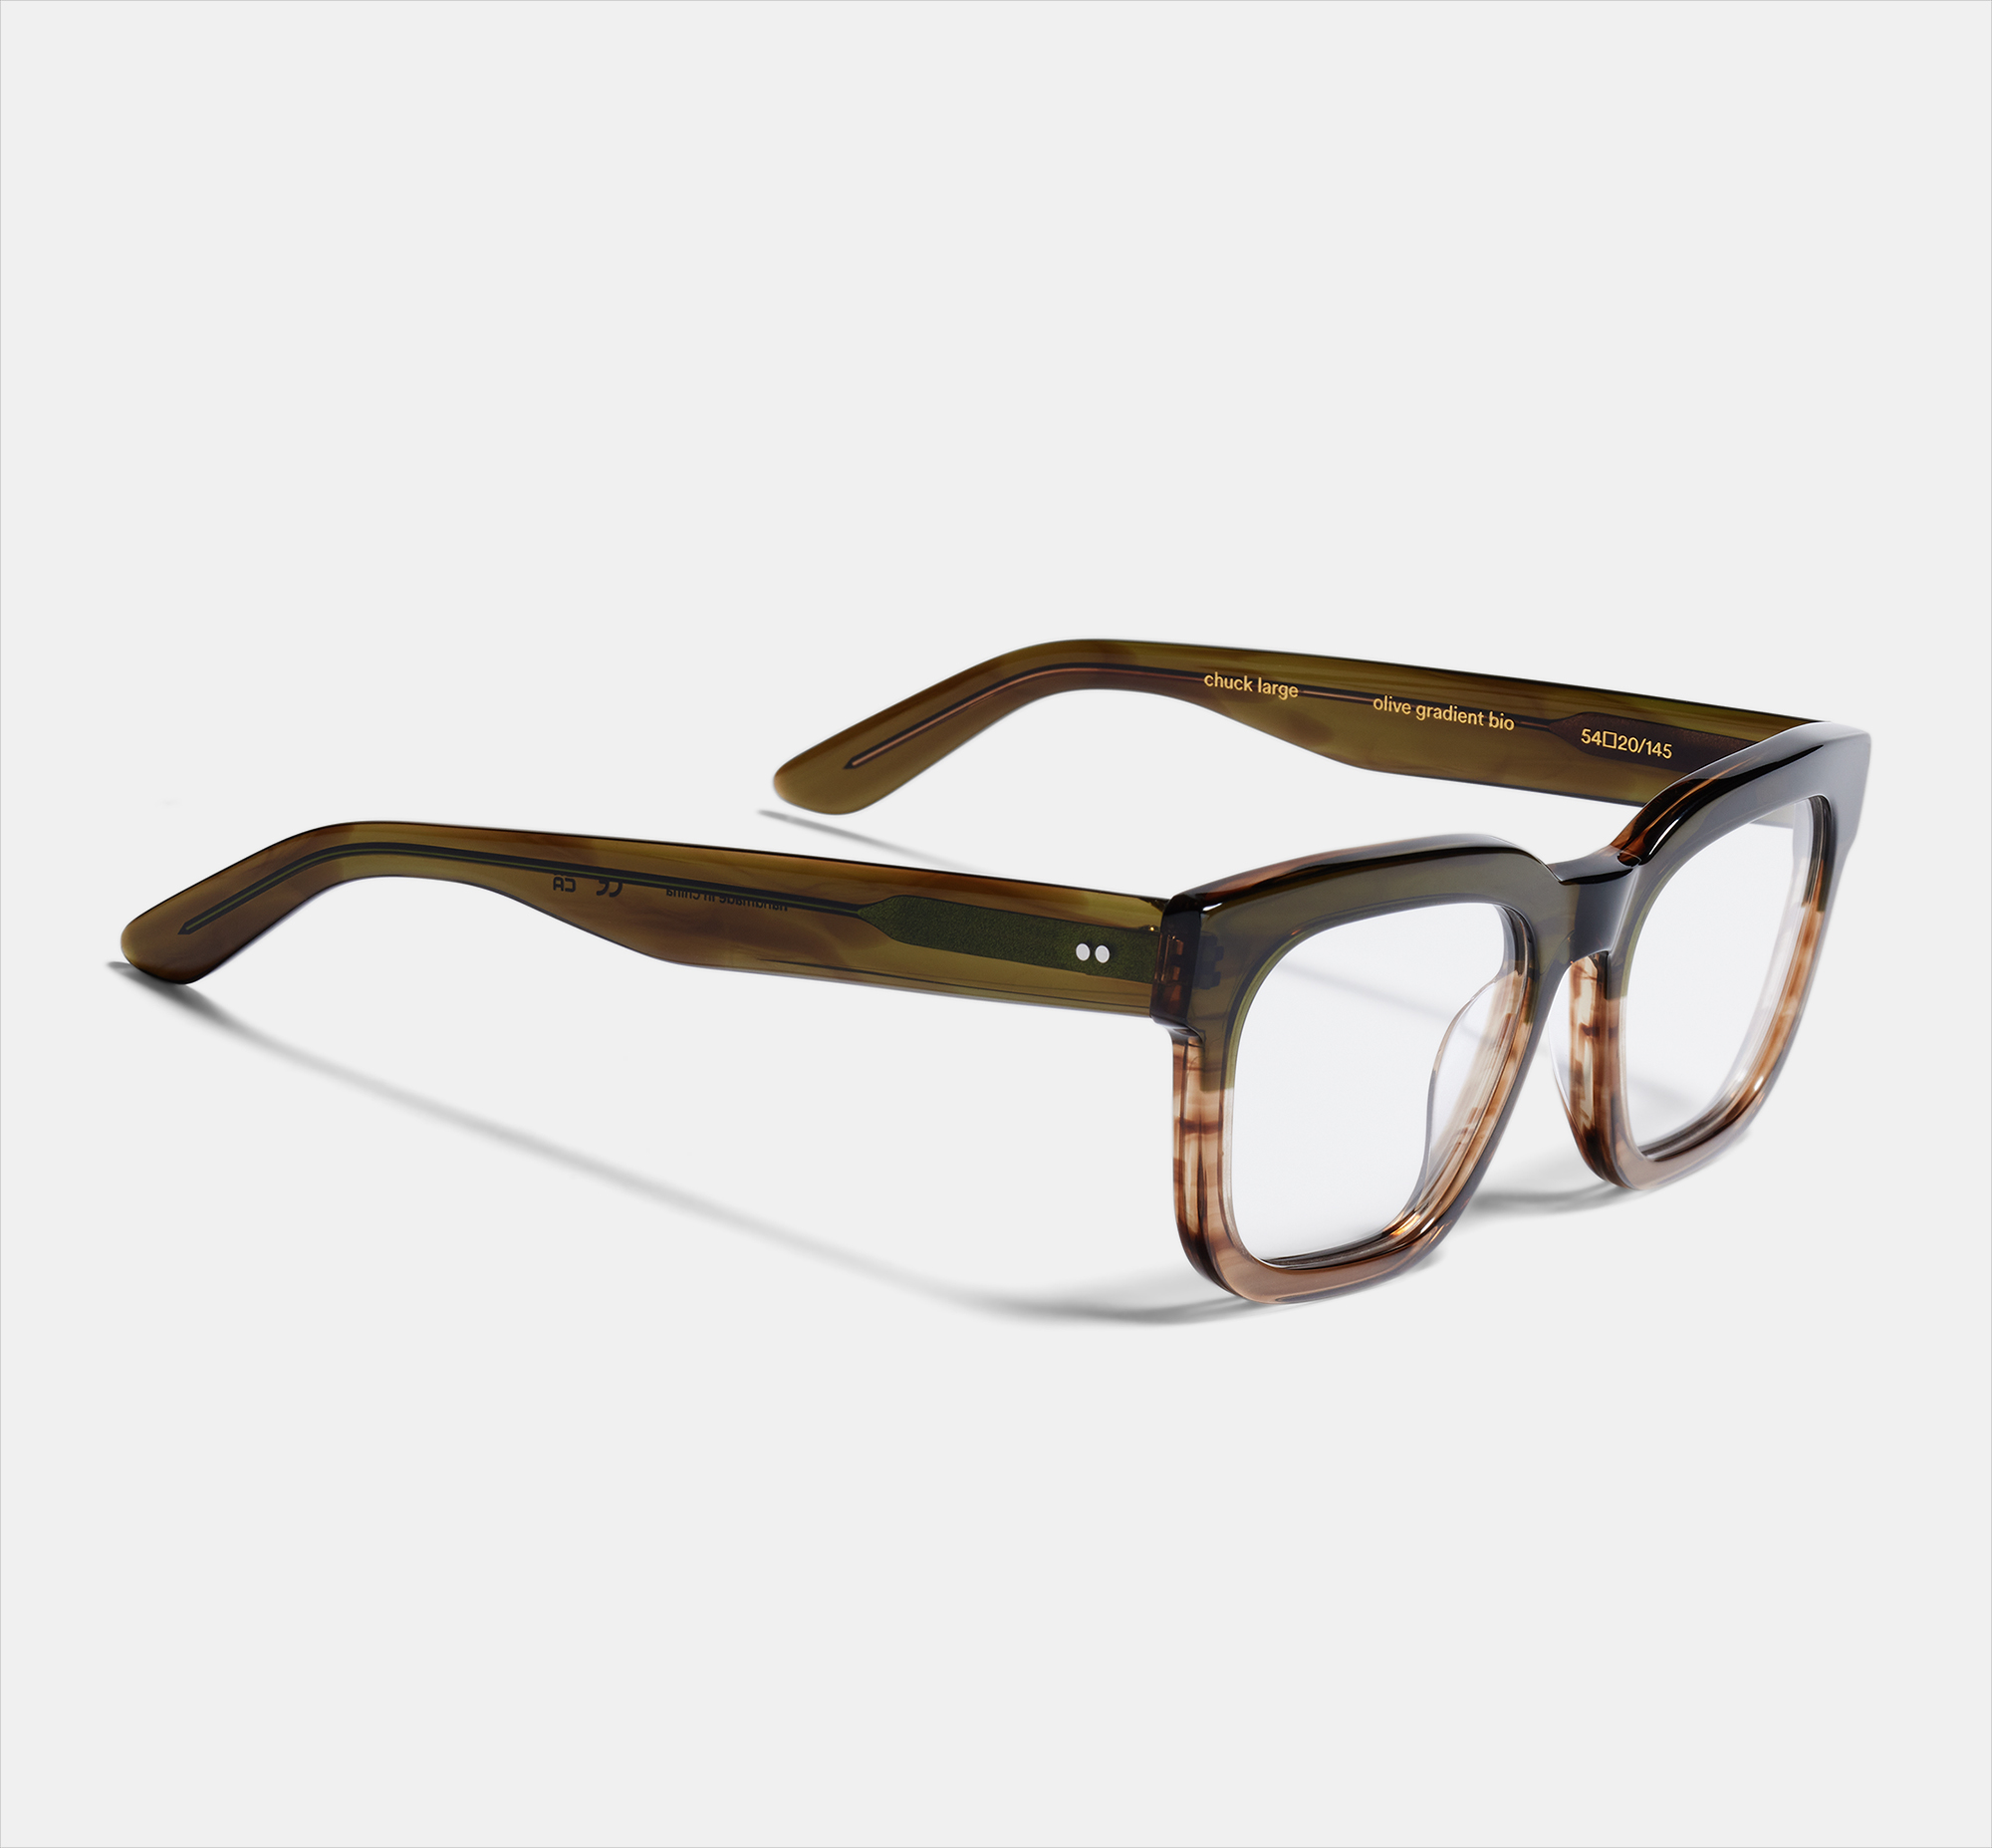 Quality Prescription Glasses from Ace & Tate